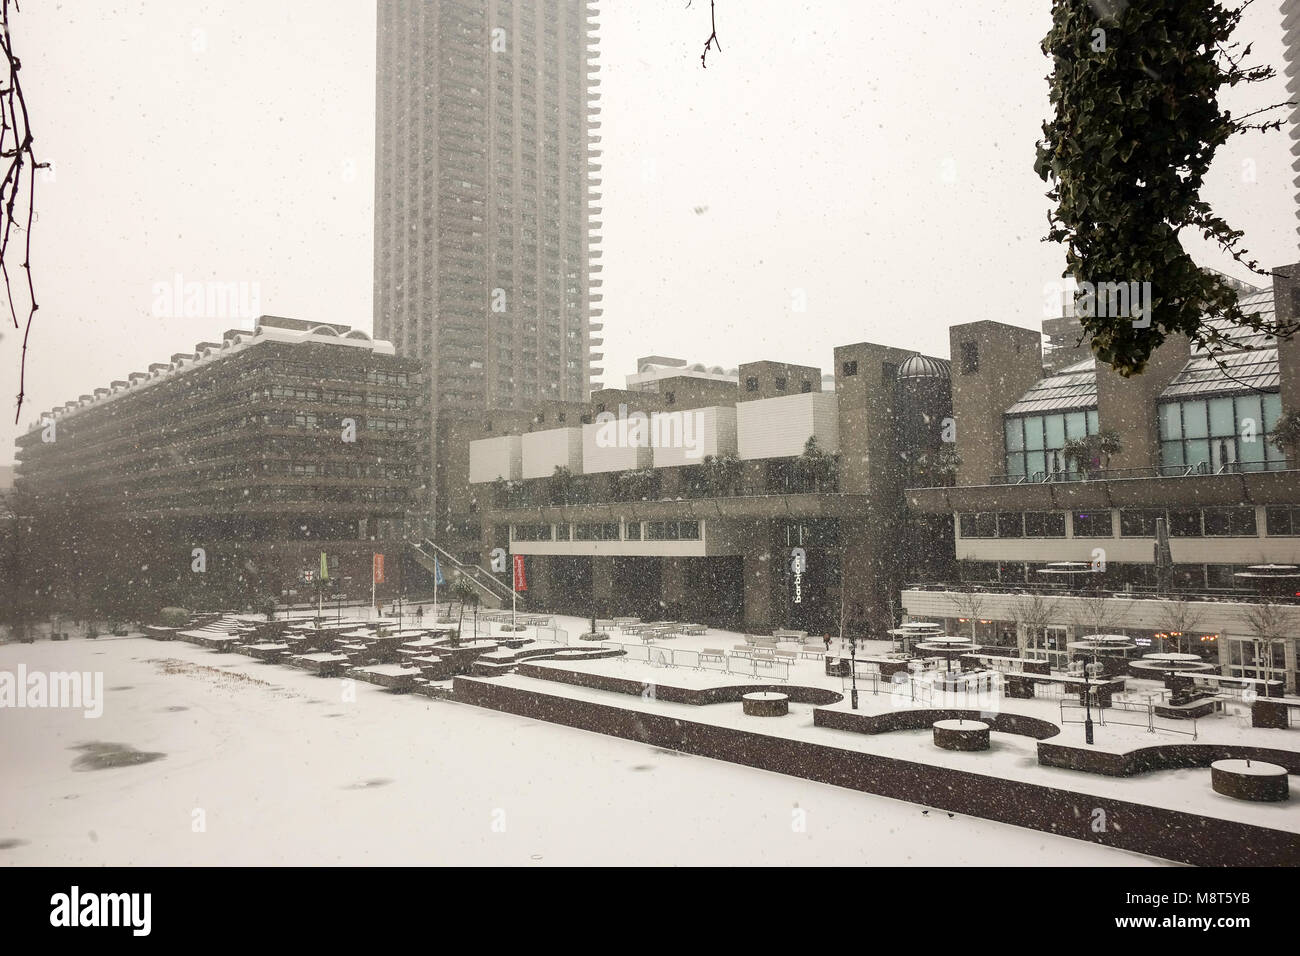 LONDON, UK -28th Feb 2017: Heavy snow falls across the Barbican Centre caused by snow storm Emma. Stock Photo